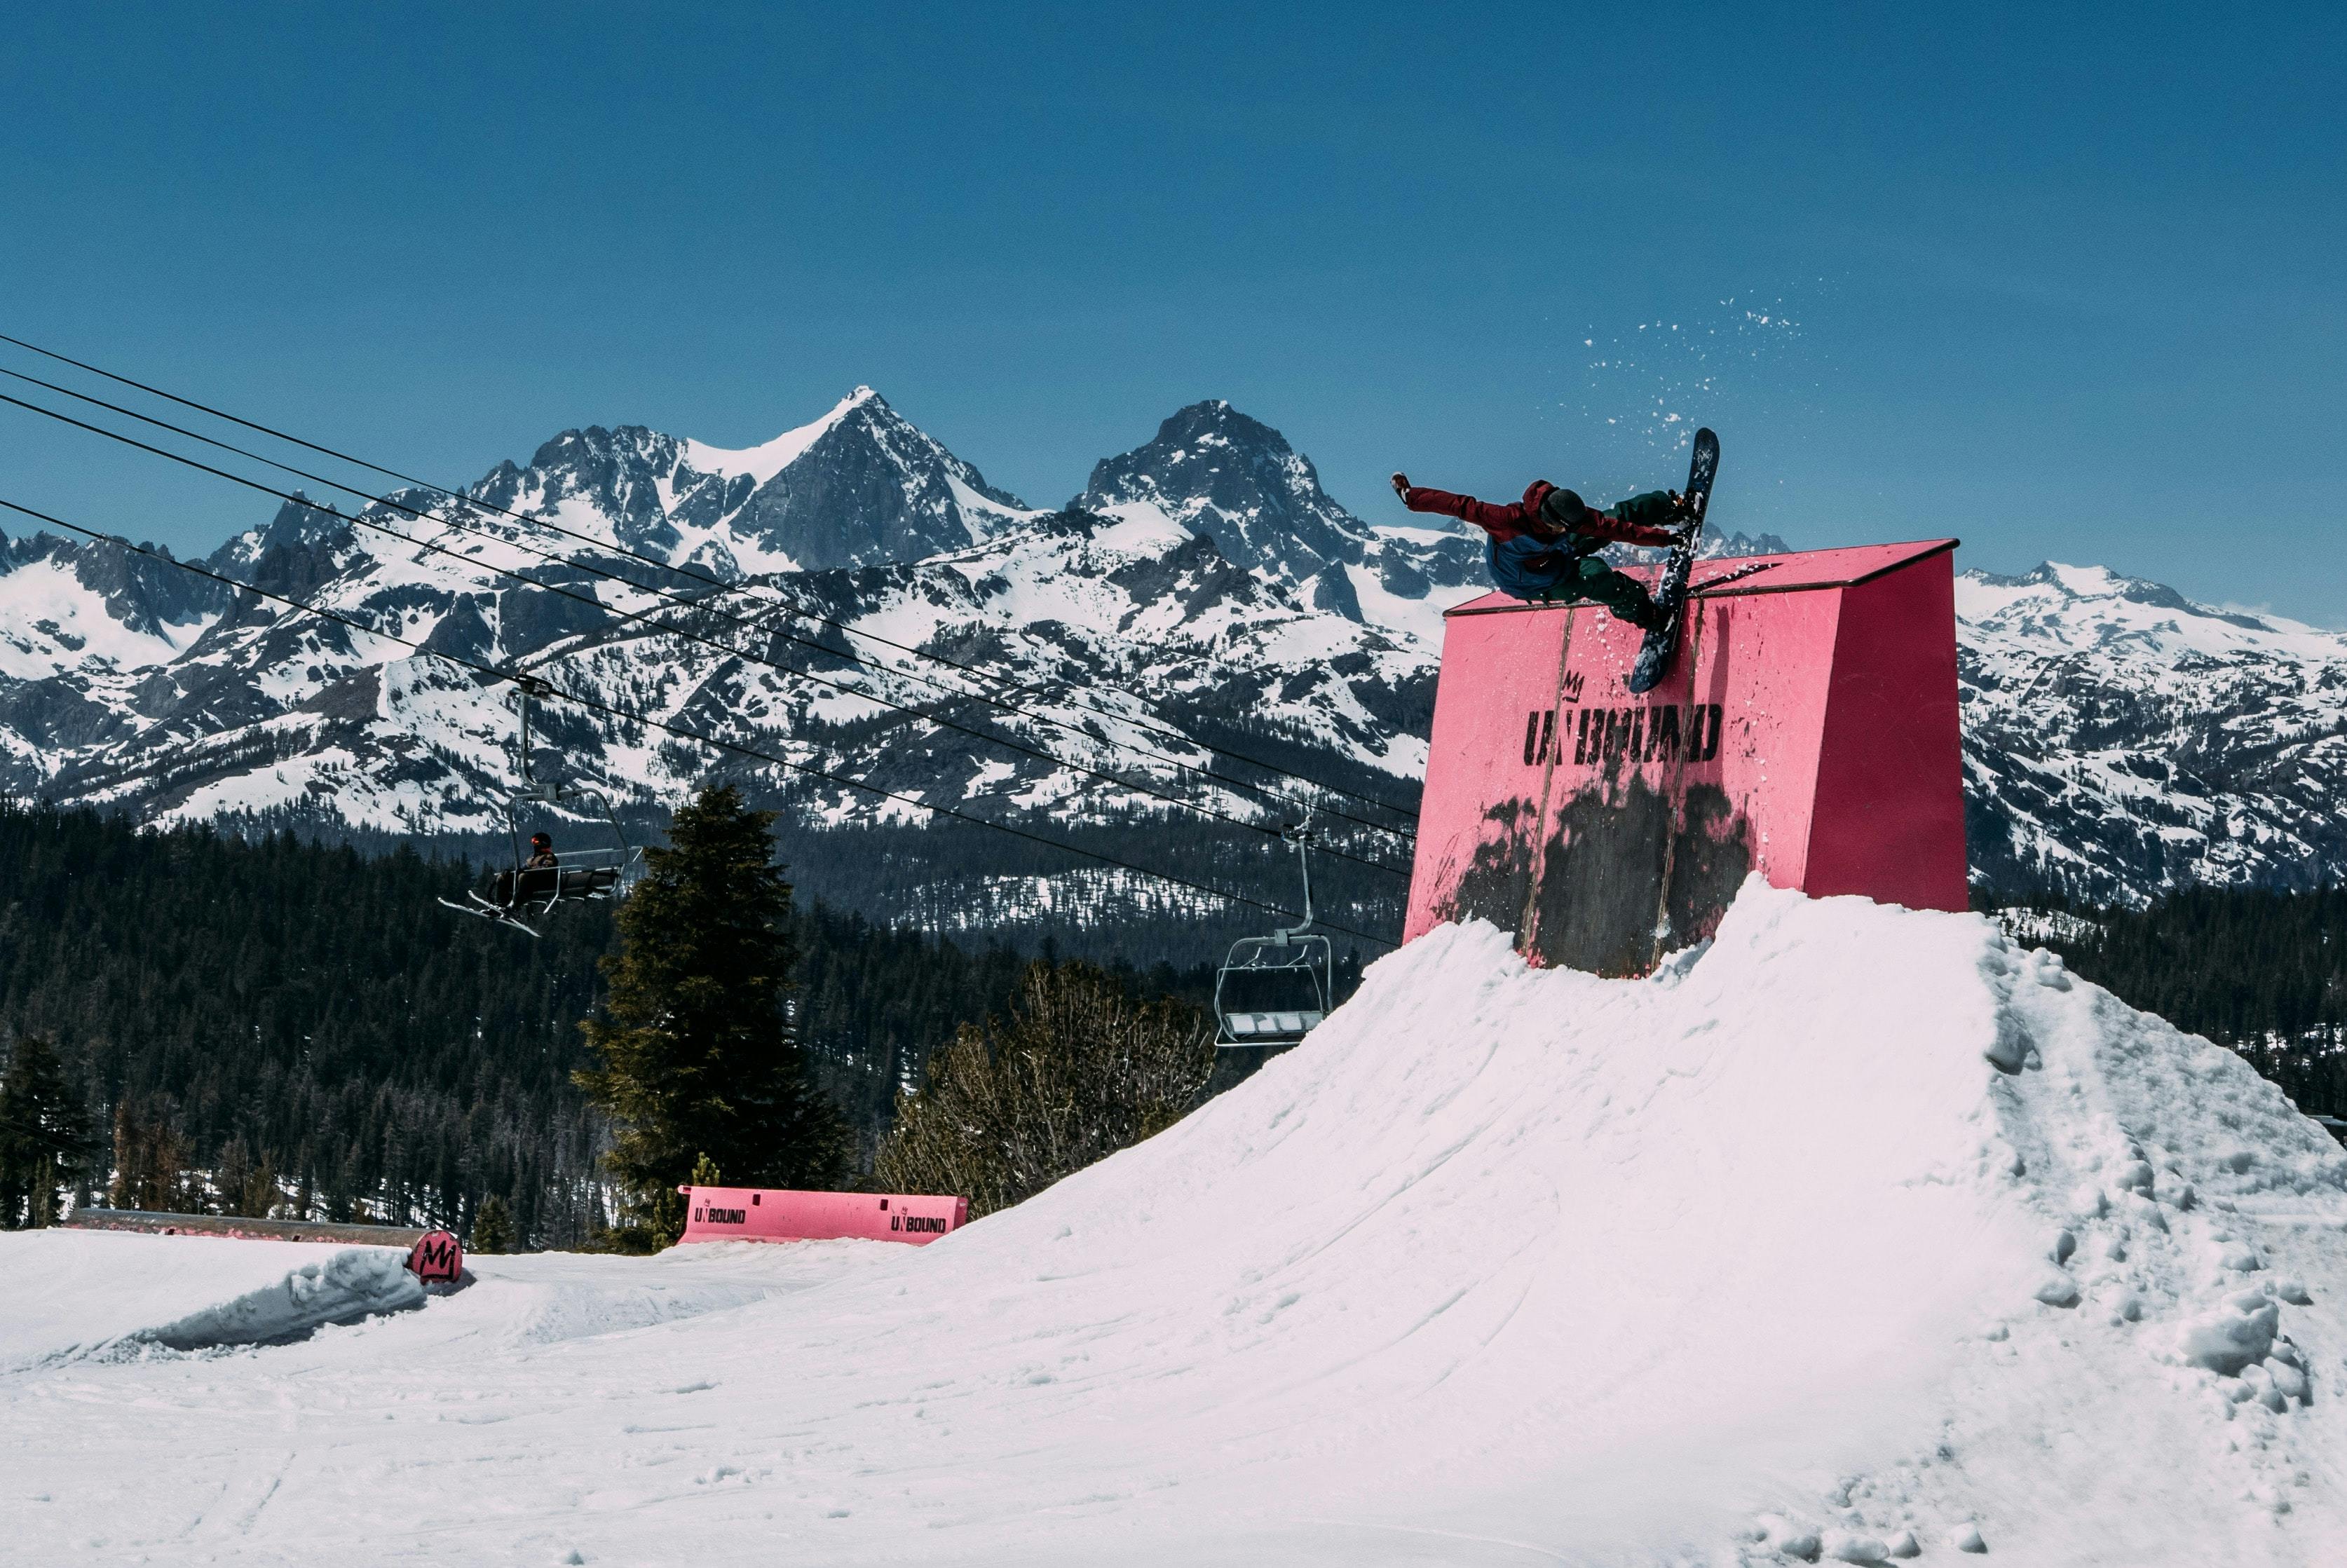 A snowboarder executes a trick on a red half wall with mountains in the background